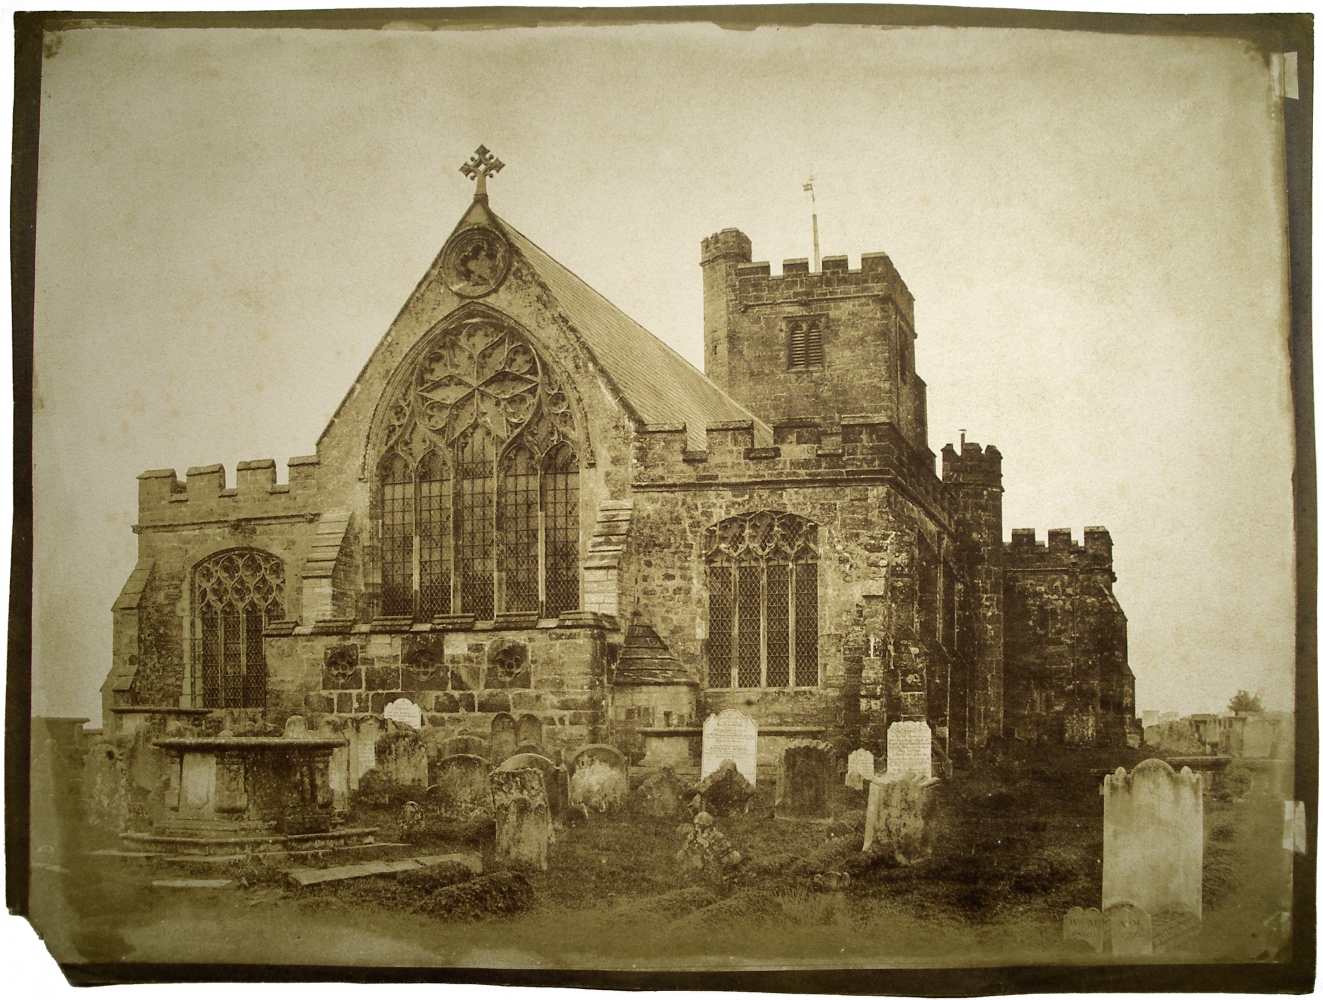 Benjamin Brecknell TURNER (English, 1815-1894) East End "Hawkhurst Church" Kent*, 1852-1854 Salt print from a waxed calotype negative 29.9 x 39.8 cm on 31.4 x 41.6 cm paper Titled "Hawkhurst Church" in pencil on verso